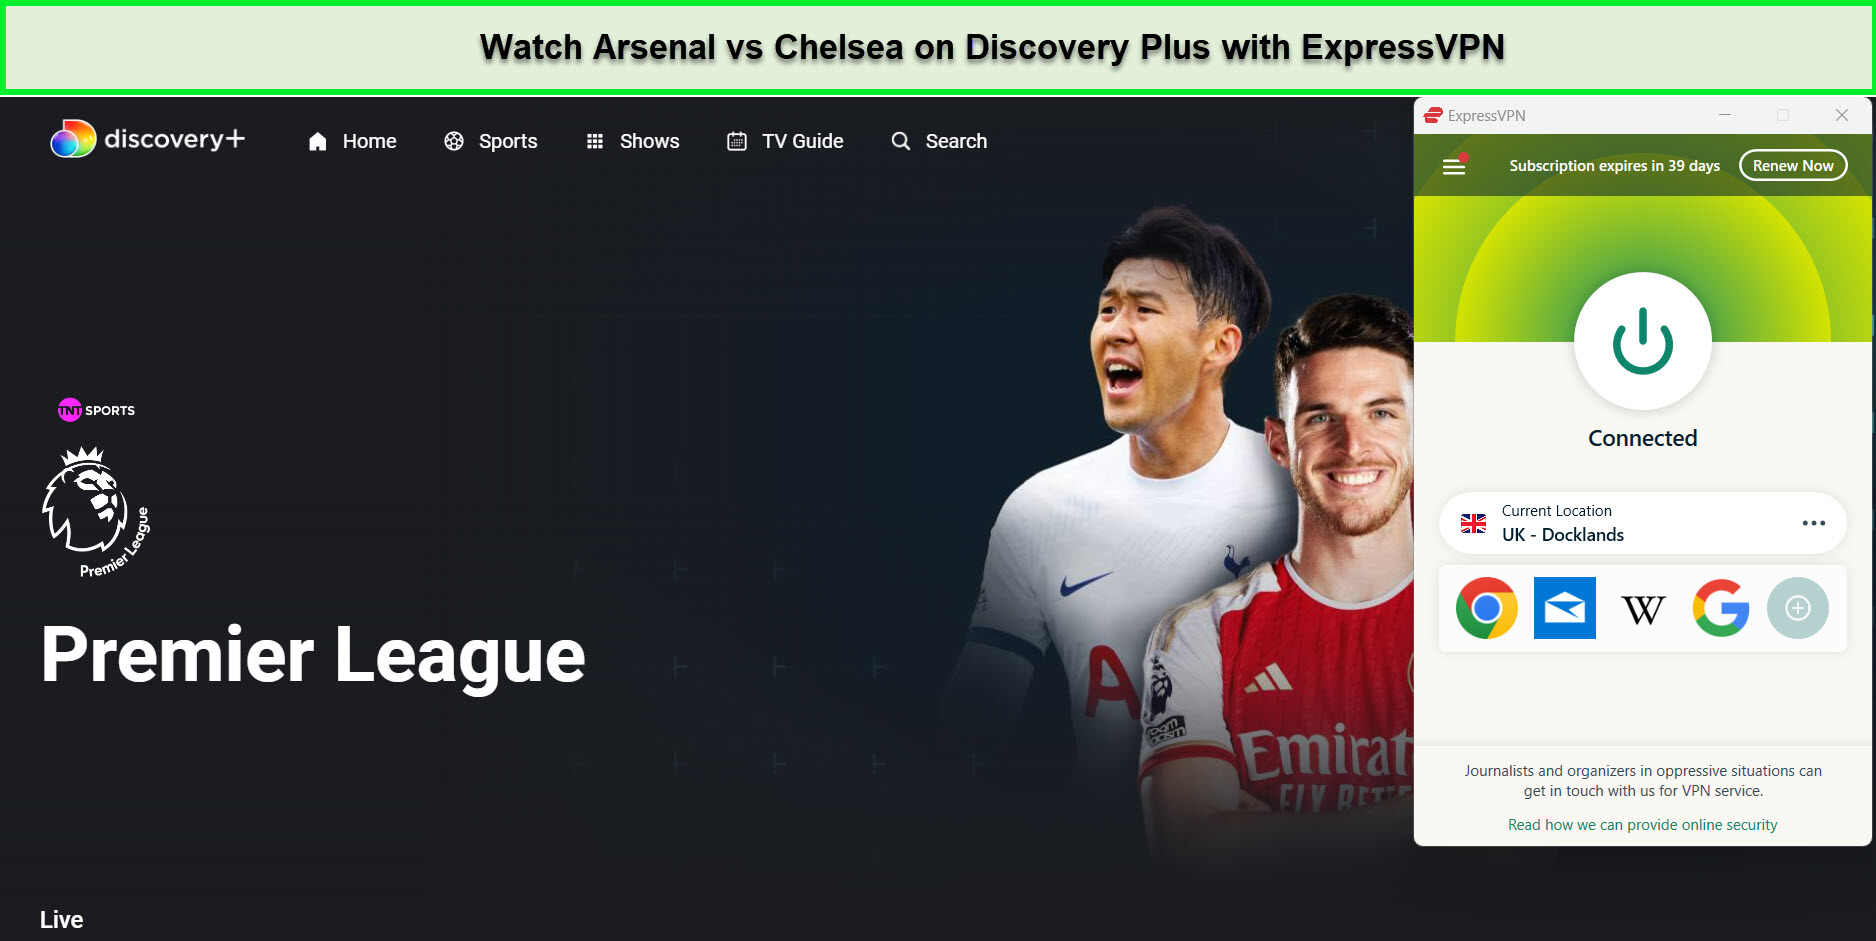 Watch-Arsenal-vs-Chelsea-in-UAE-on-Discovery-Plus-with-ExpressVPN